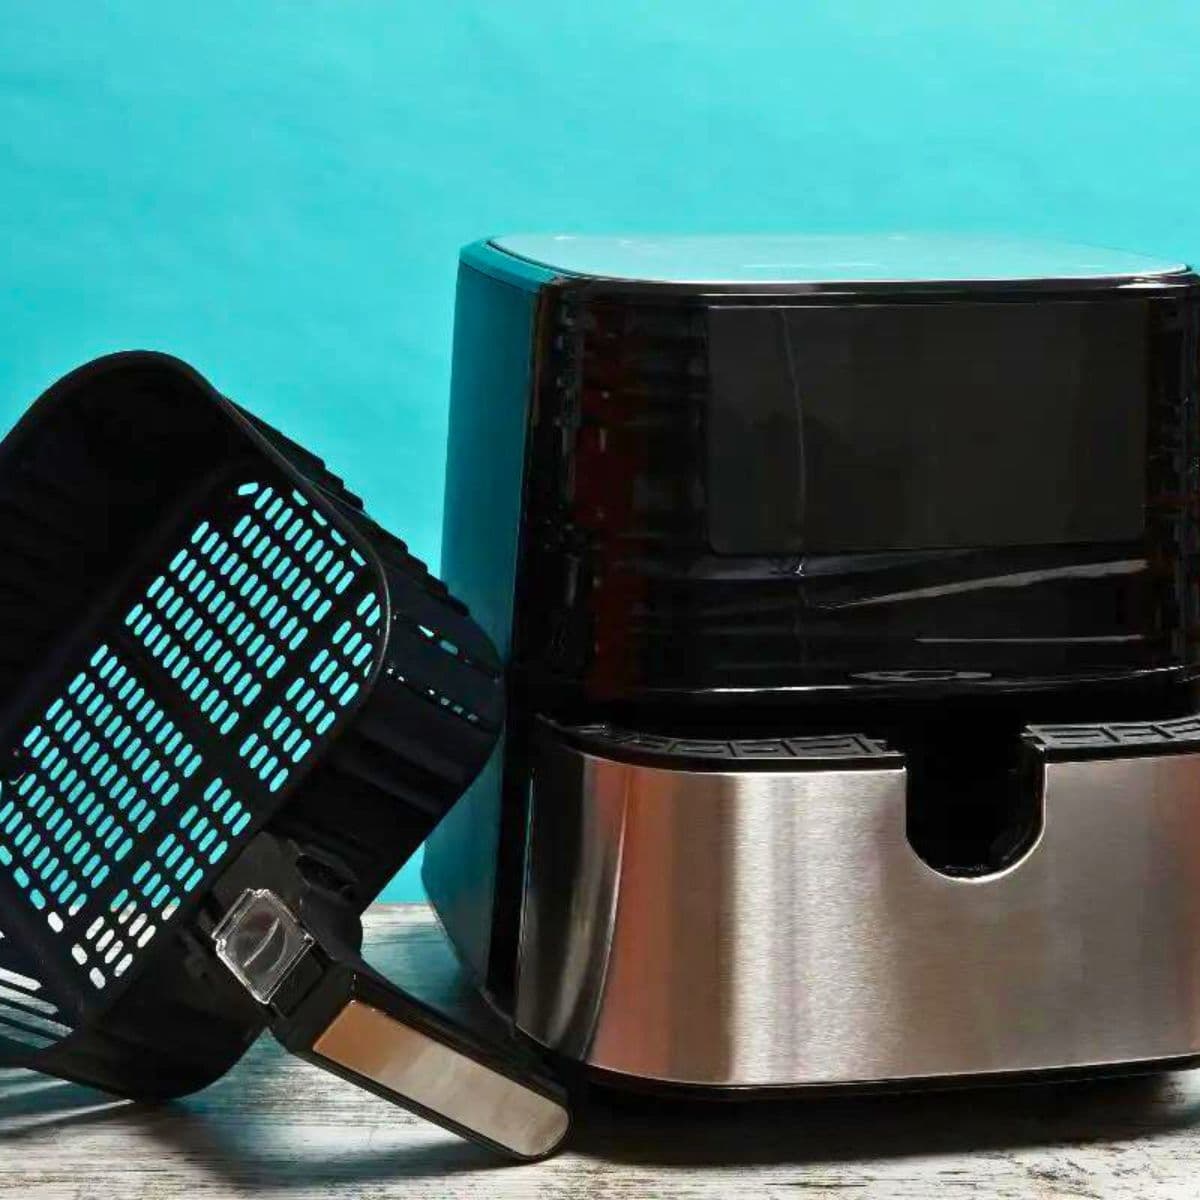 How To Clean A Ninja Air Fryer featured image